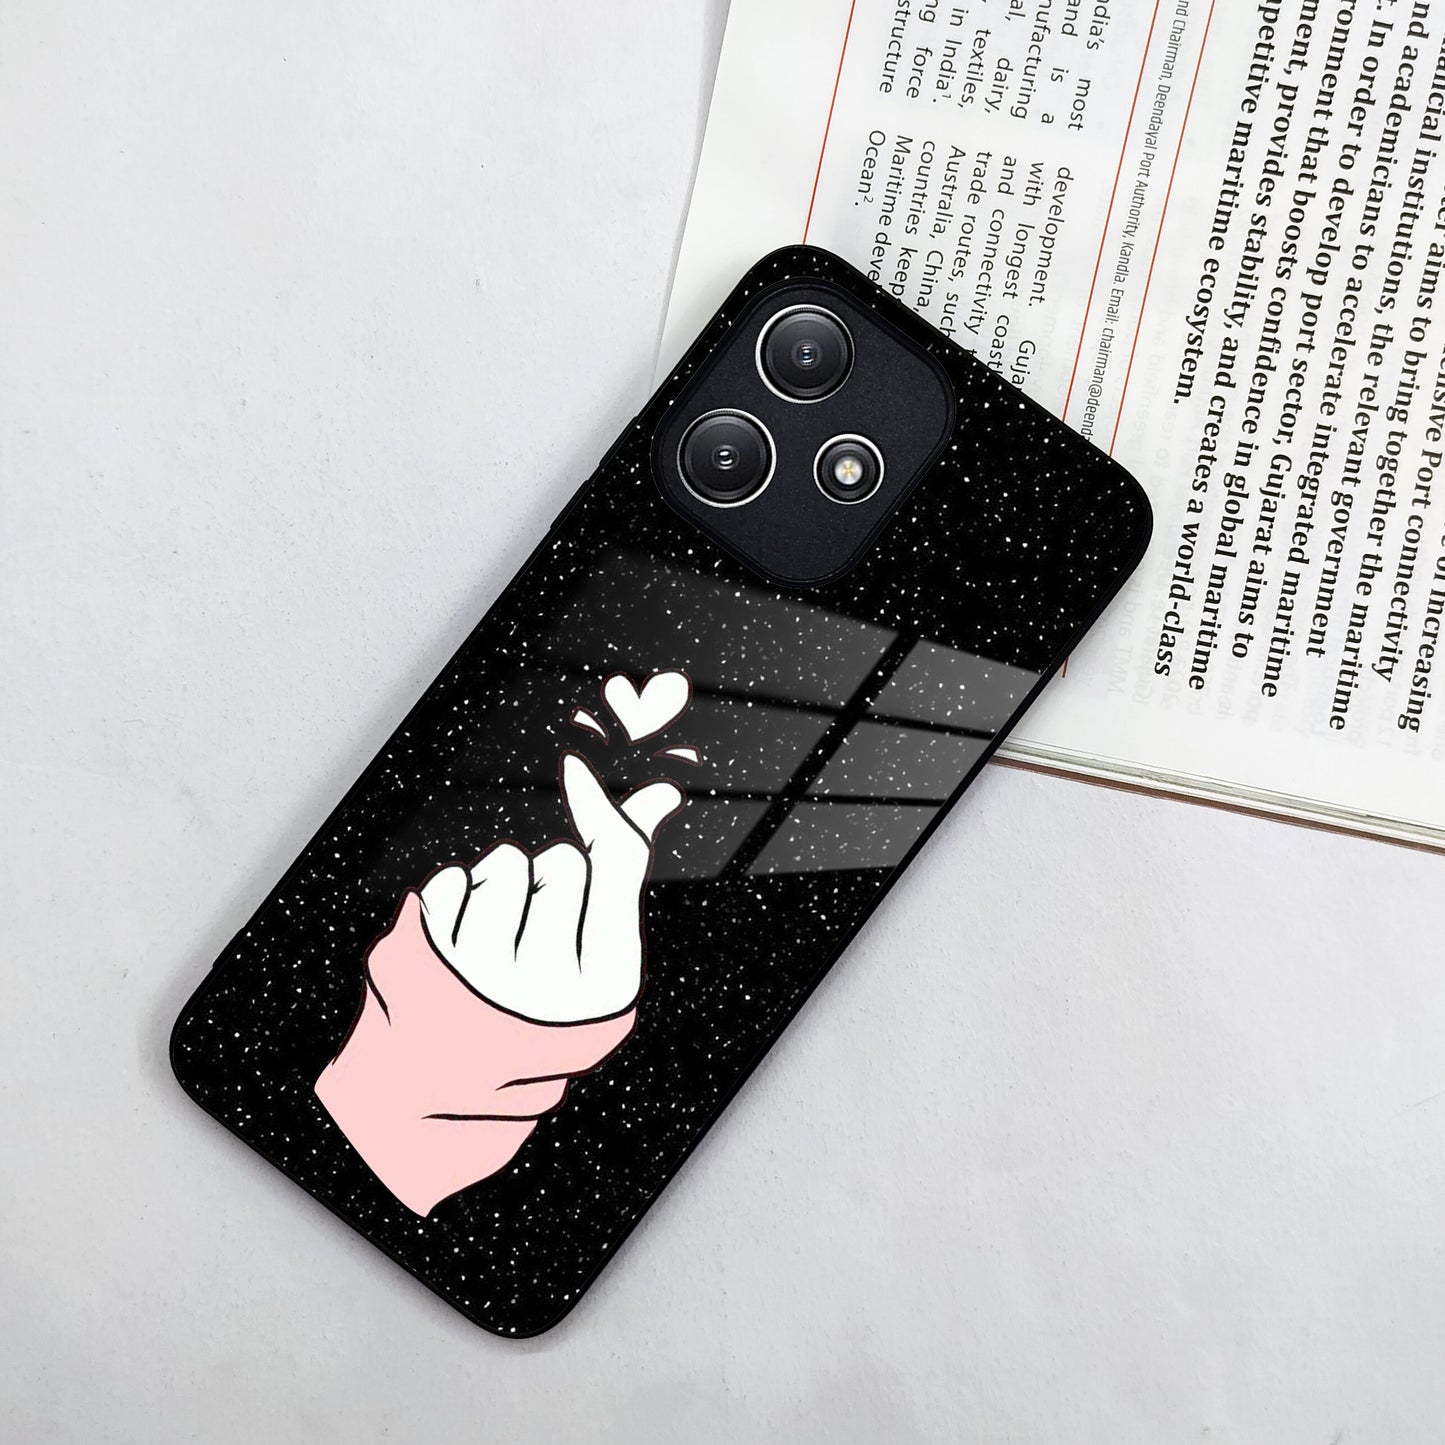 Kpop Love Glass Phone Case And Cover For Redmi/Xiaomi